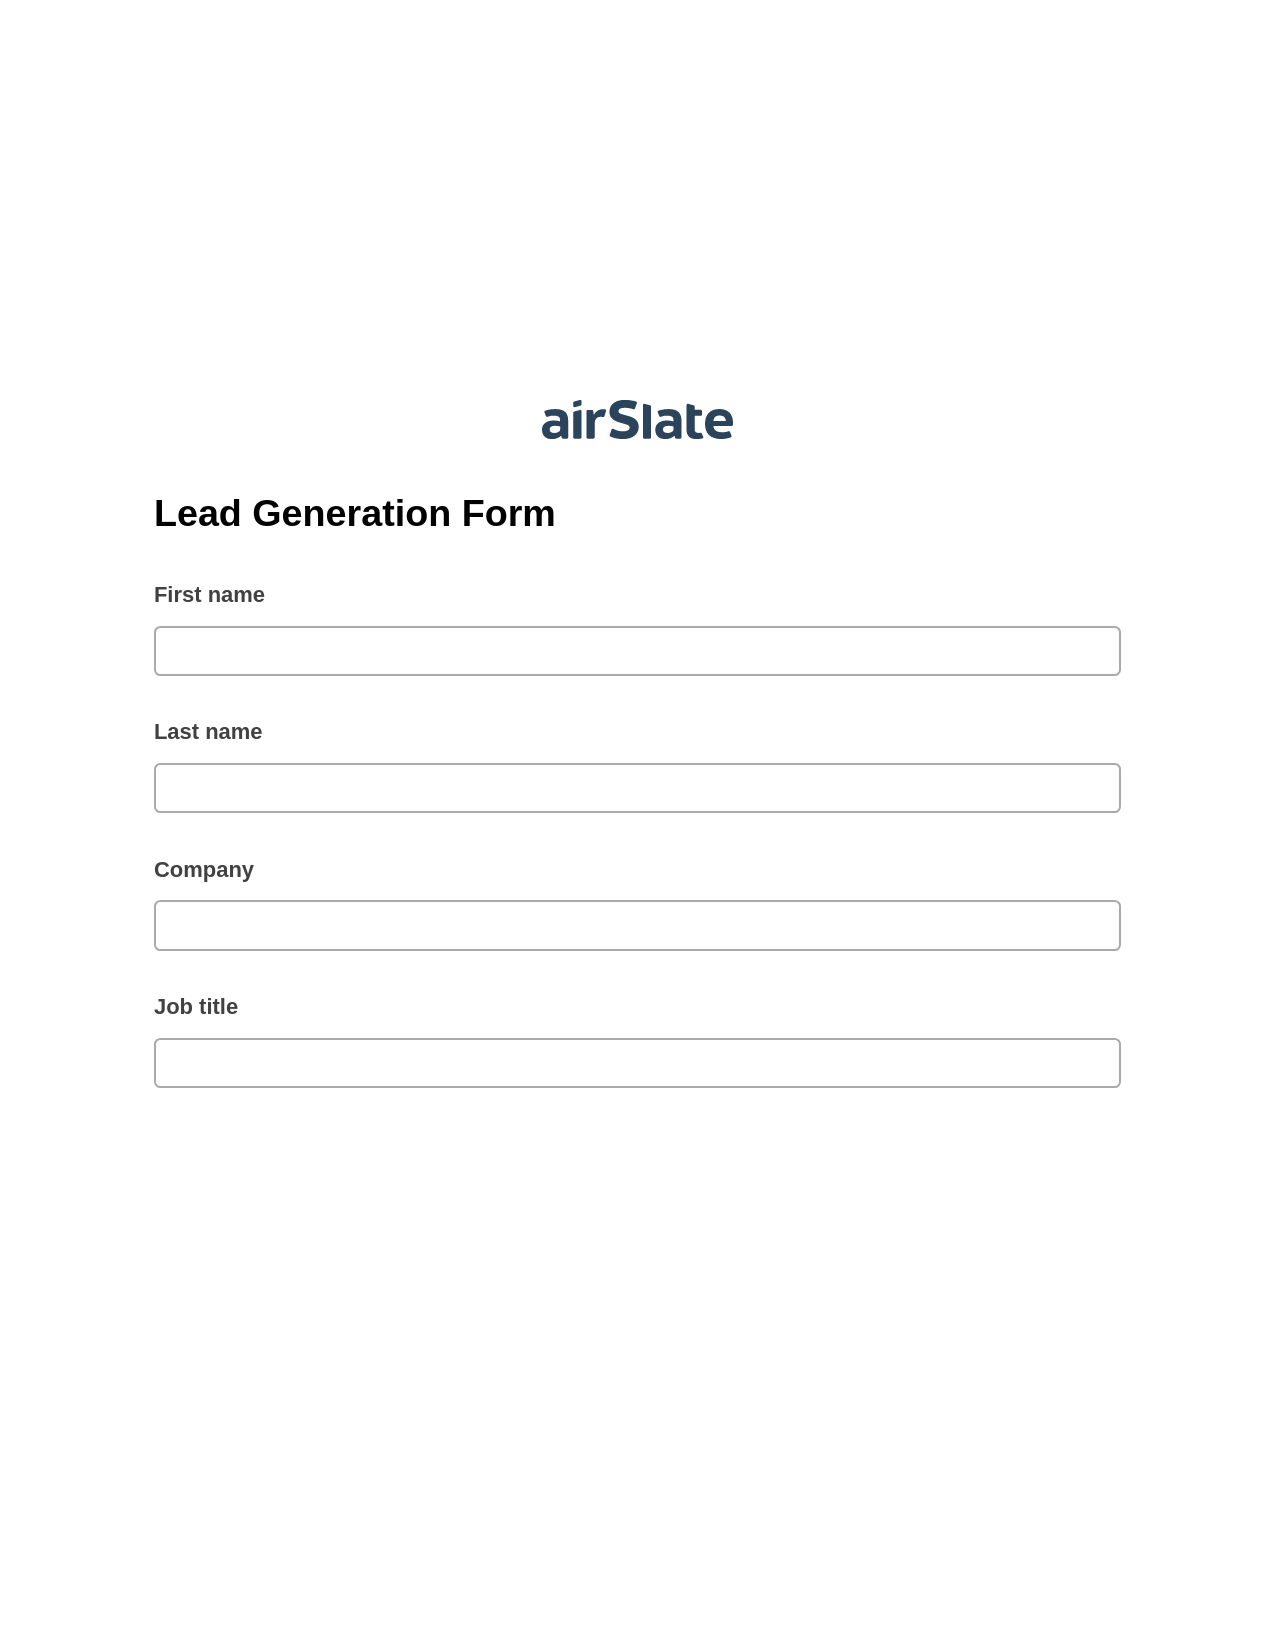 Lead Generation Form Pre-fill from Excel Spreadsheet Bot, Add Tags to Slate Bot, Archive to OneDrive Bot